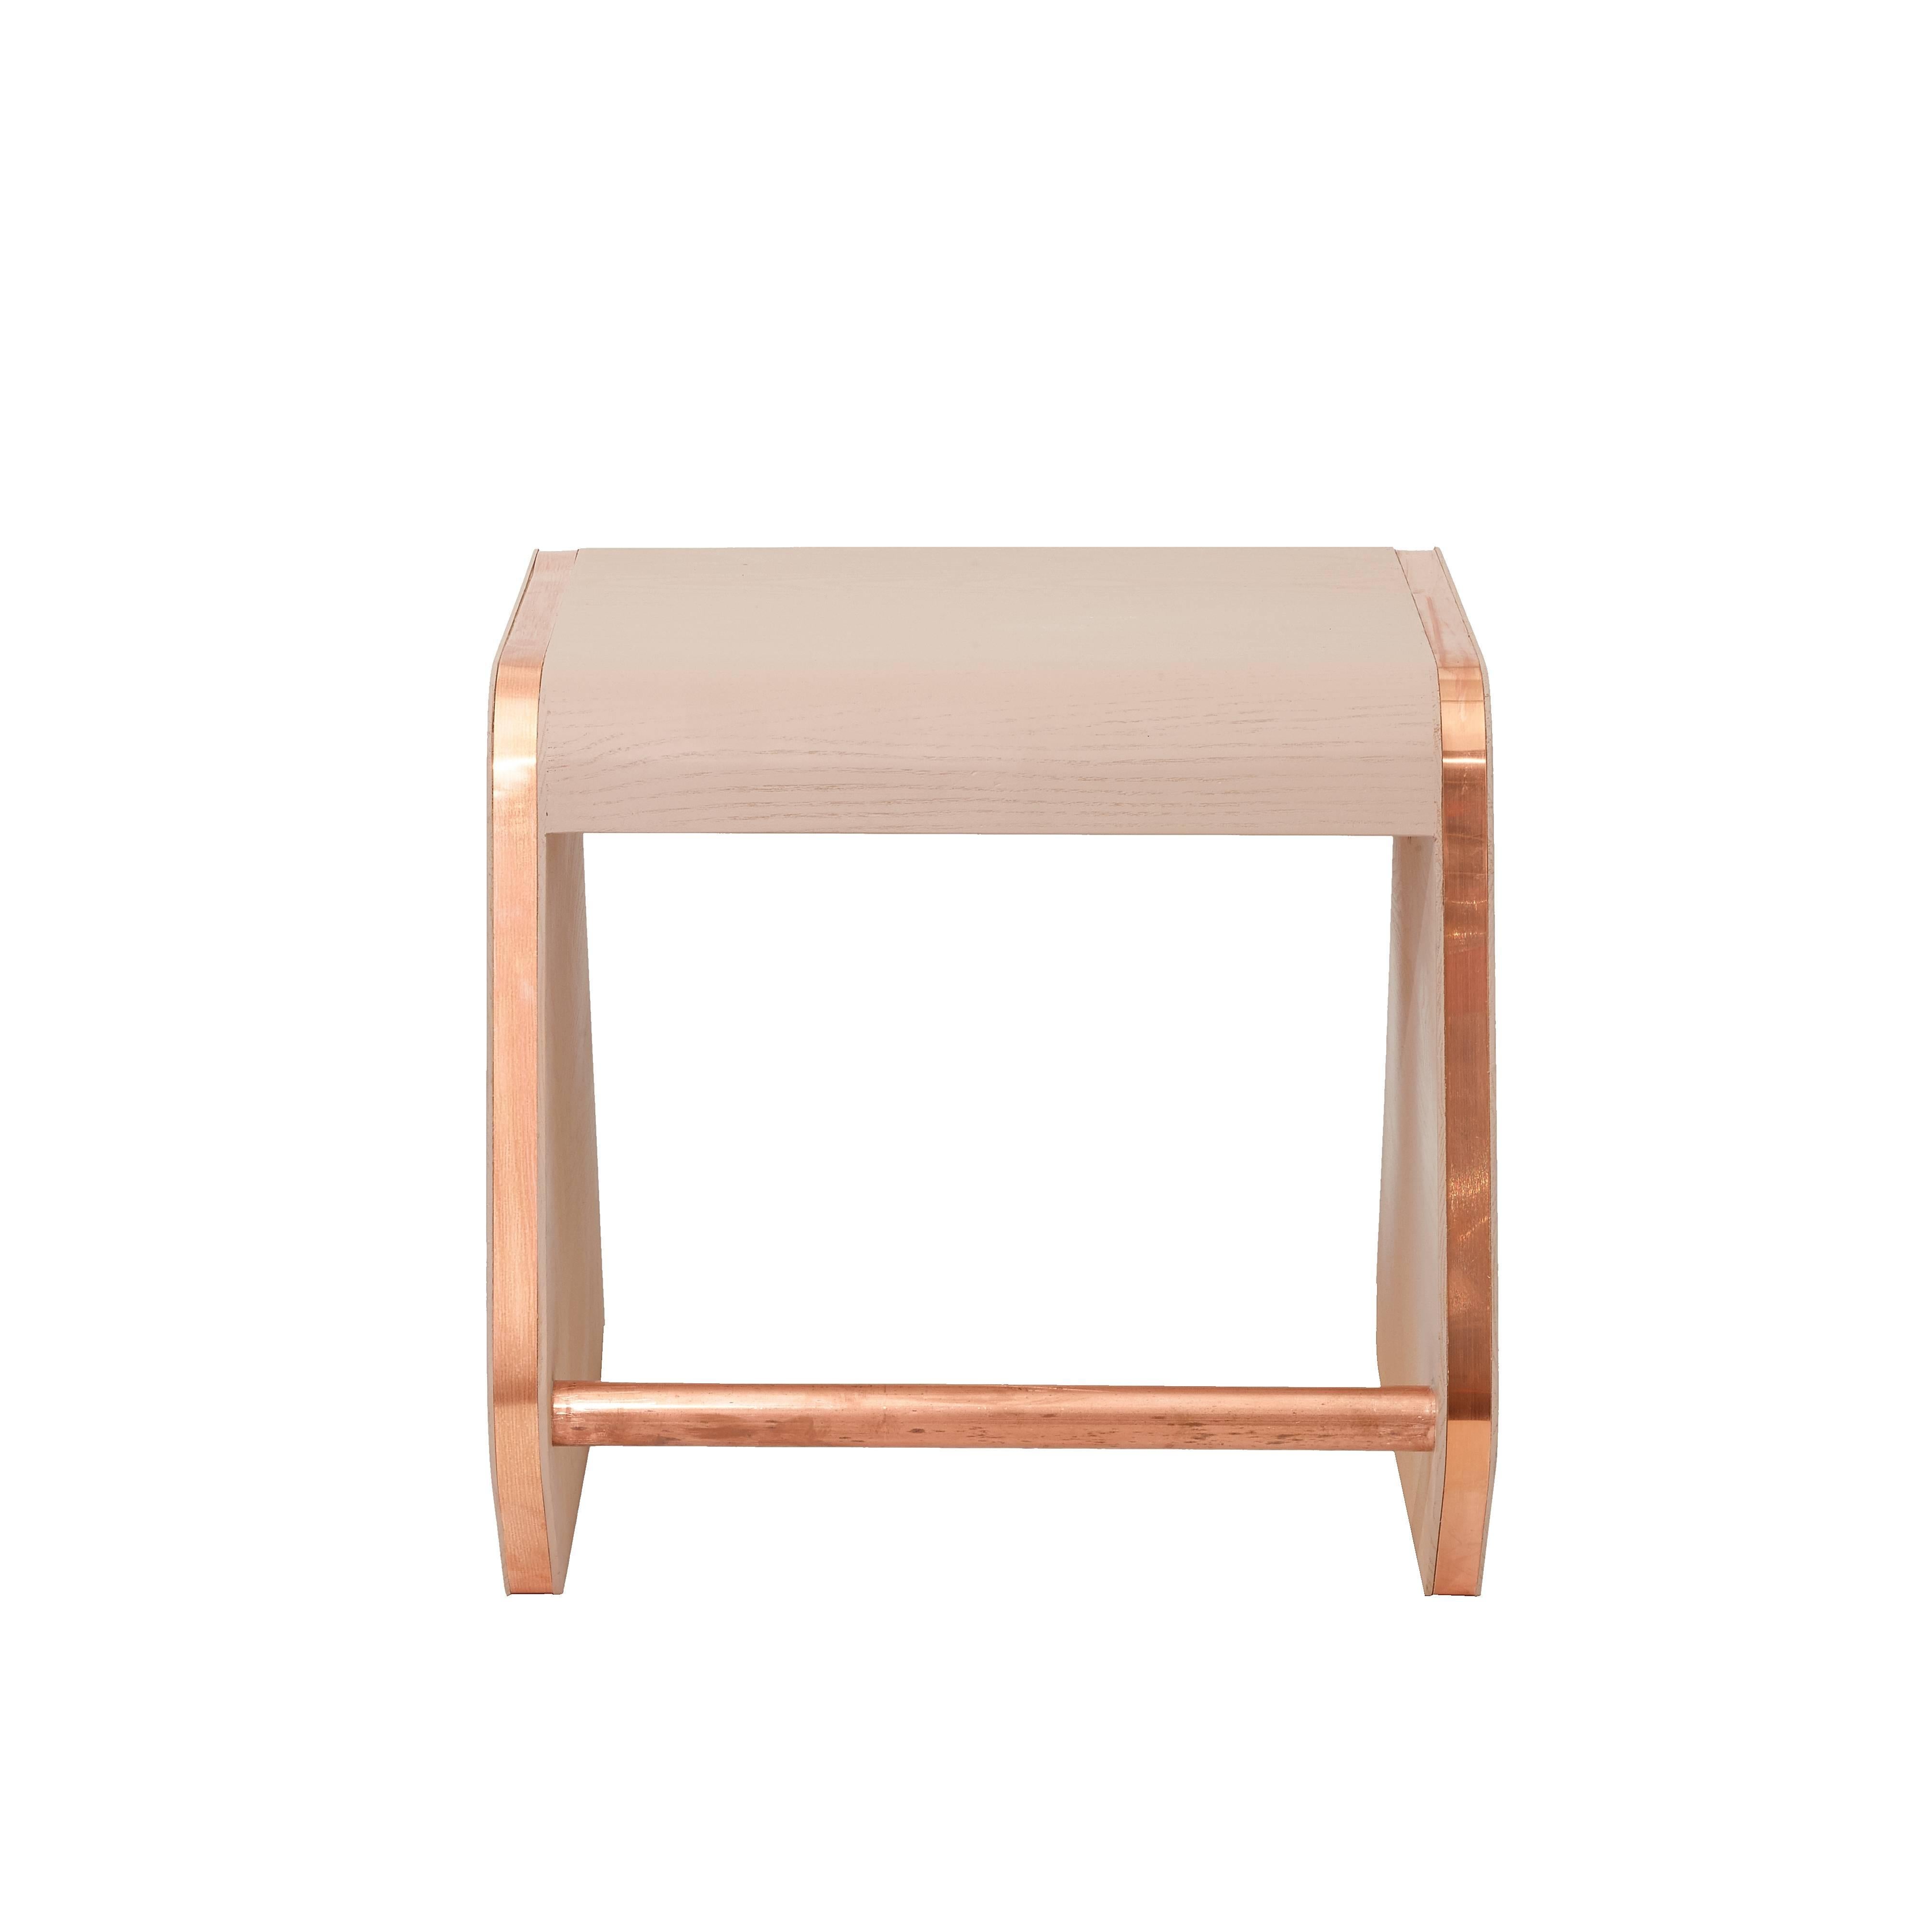 American Heritage 'Perch' Child Chair by Studiokinder in Blush Pigmented Ash with Copper For Sale